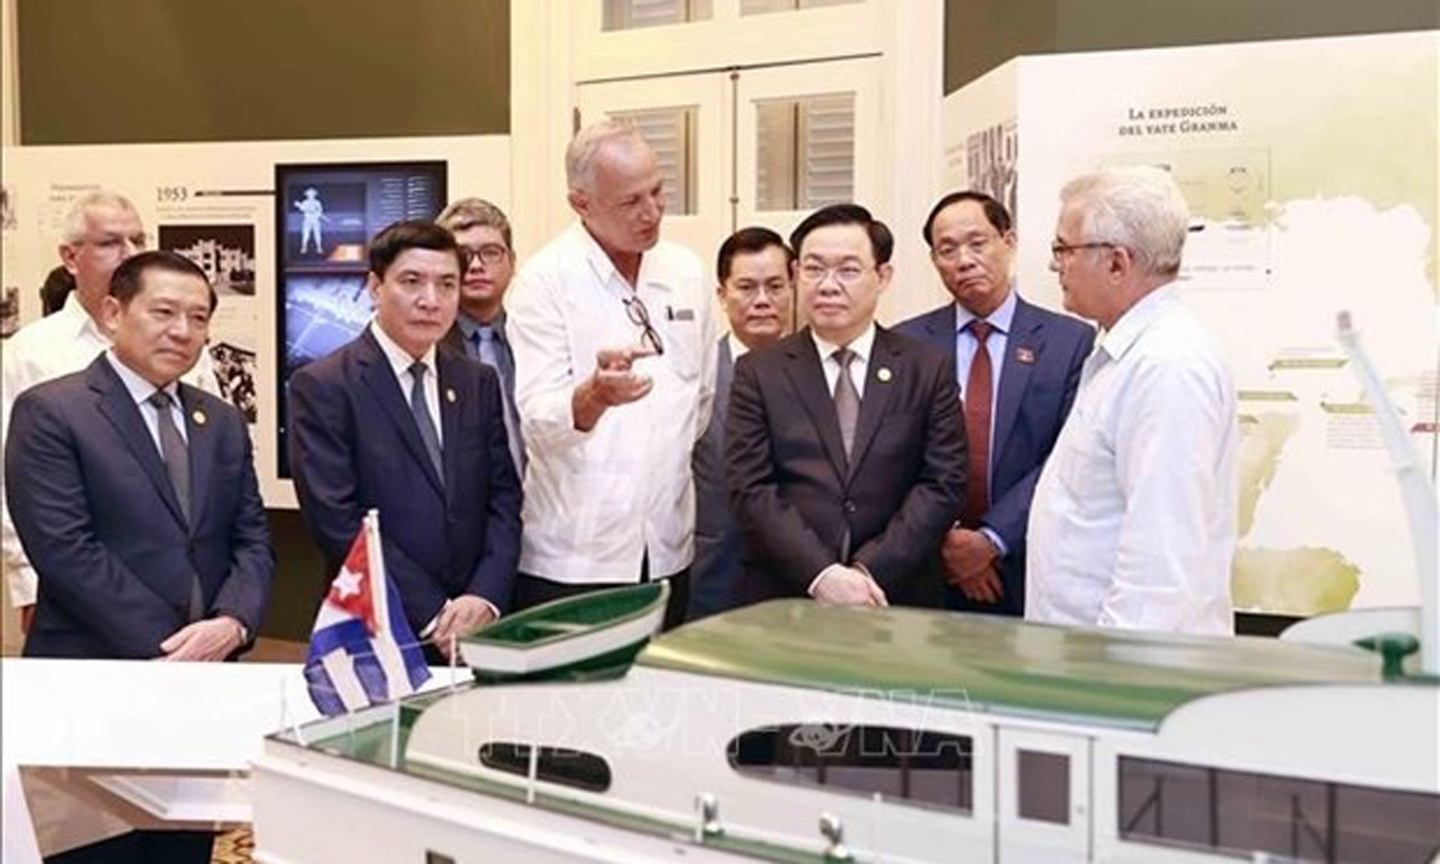 ABO/NDO- National Assembly (NA) Chairman Vuong Dinh Hue and his entourage on April 19 morning (Cuba time) visited the Fidel Castro Ruz Centre in La Habana, within the framework of his official visit to Cuba.